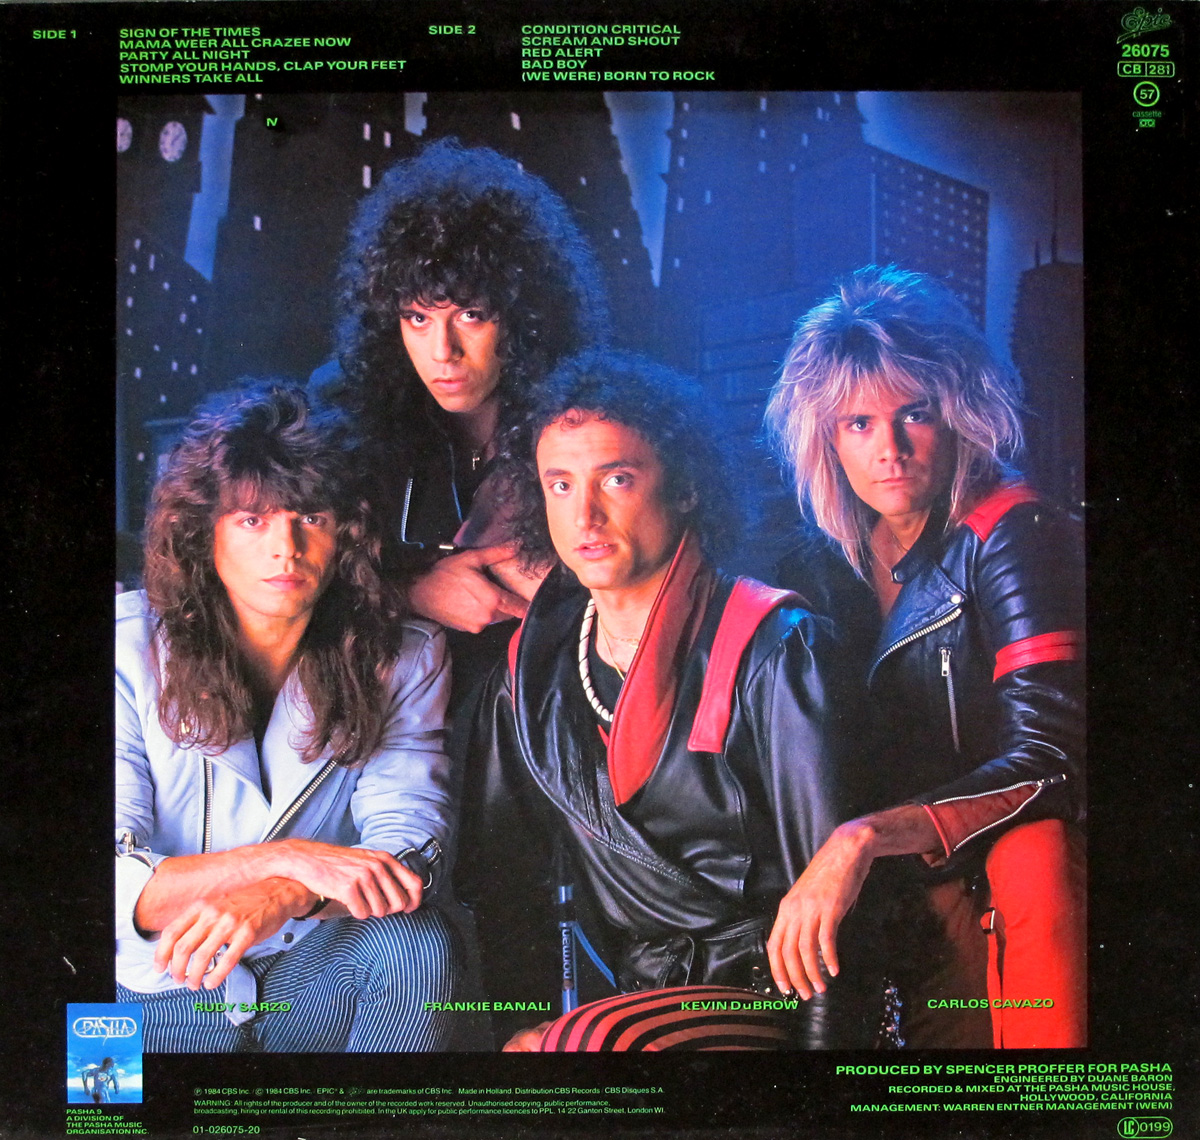 Quiet Riot mama Weer All Crazee Now 45 Record 